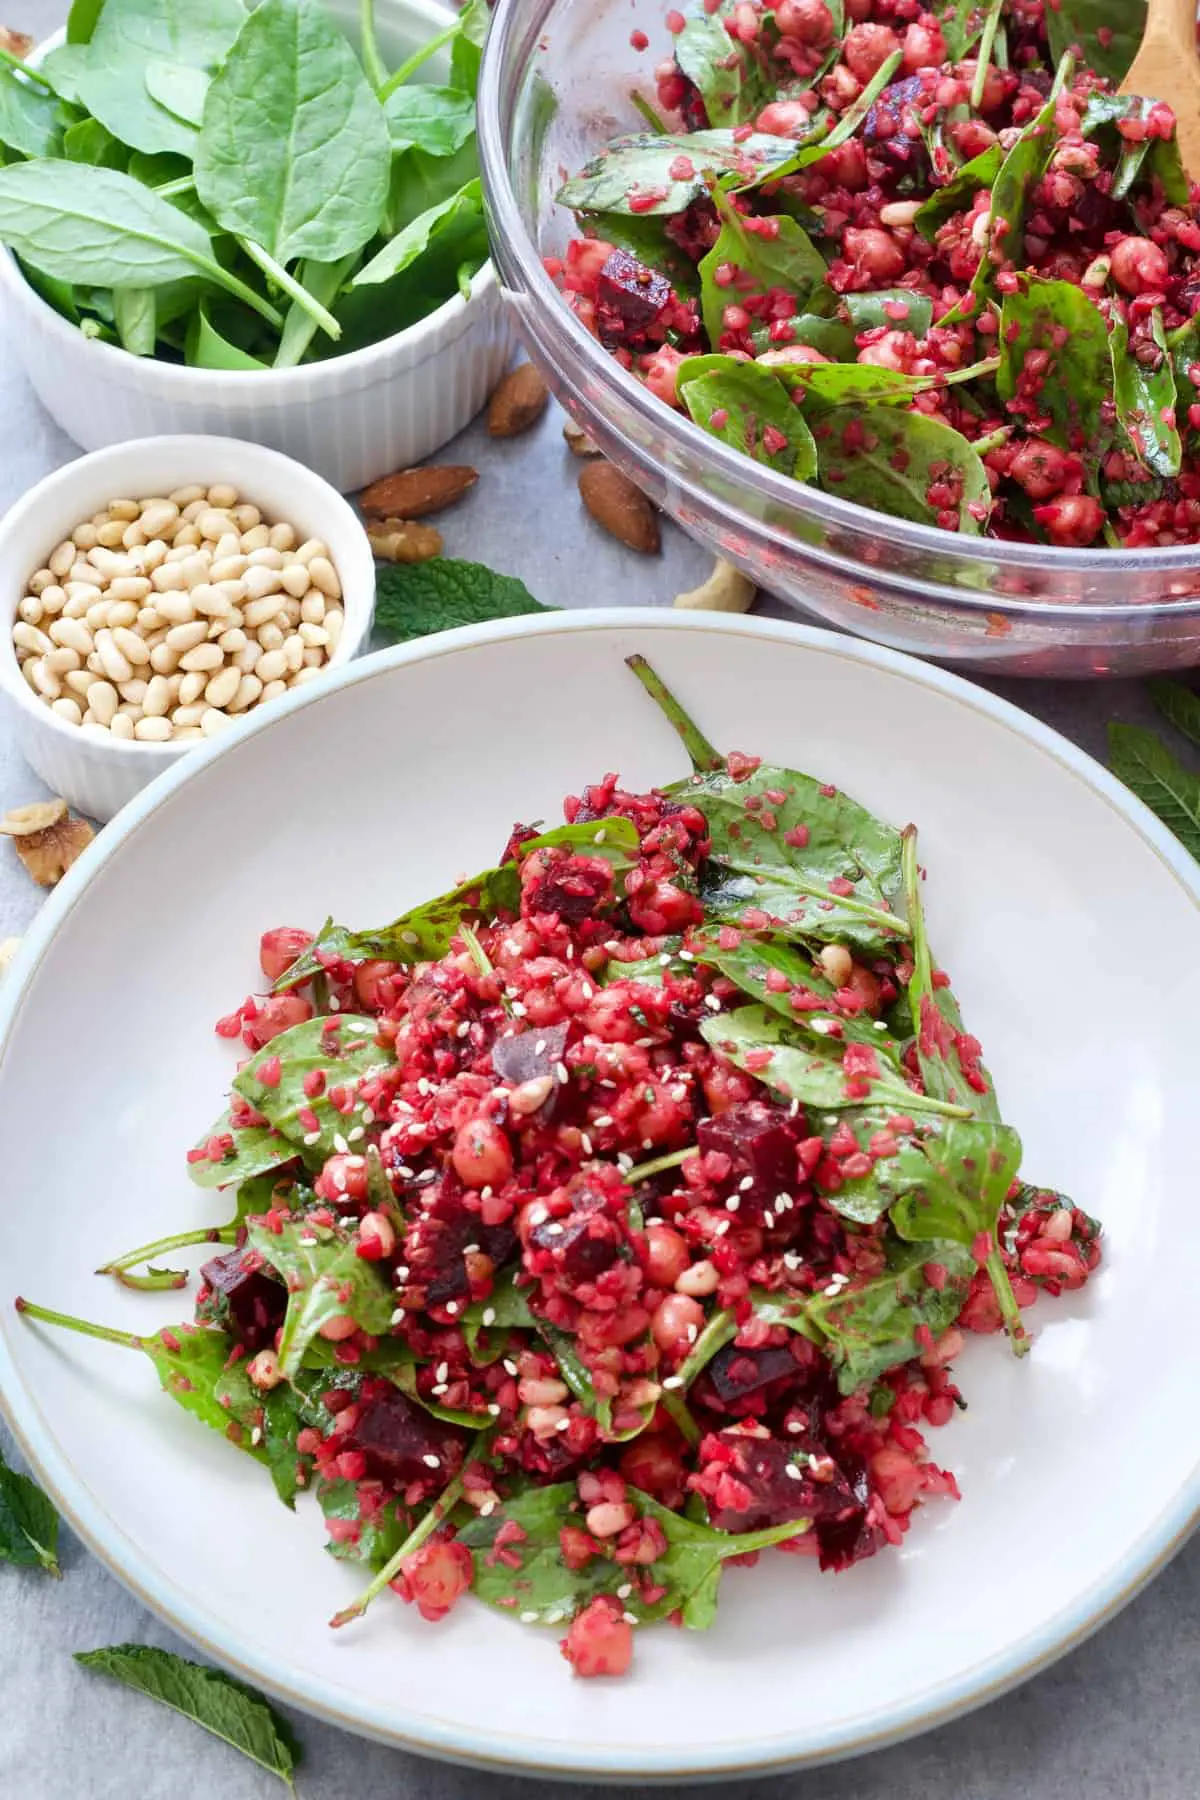 Beetroot Salad With Chickpeas